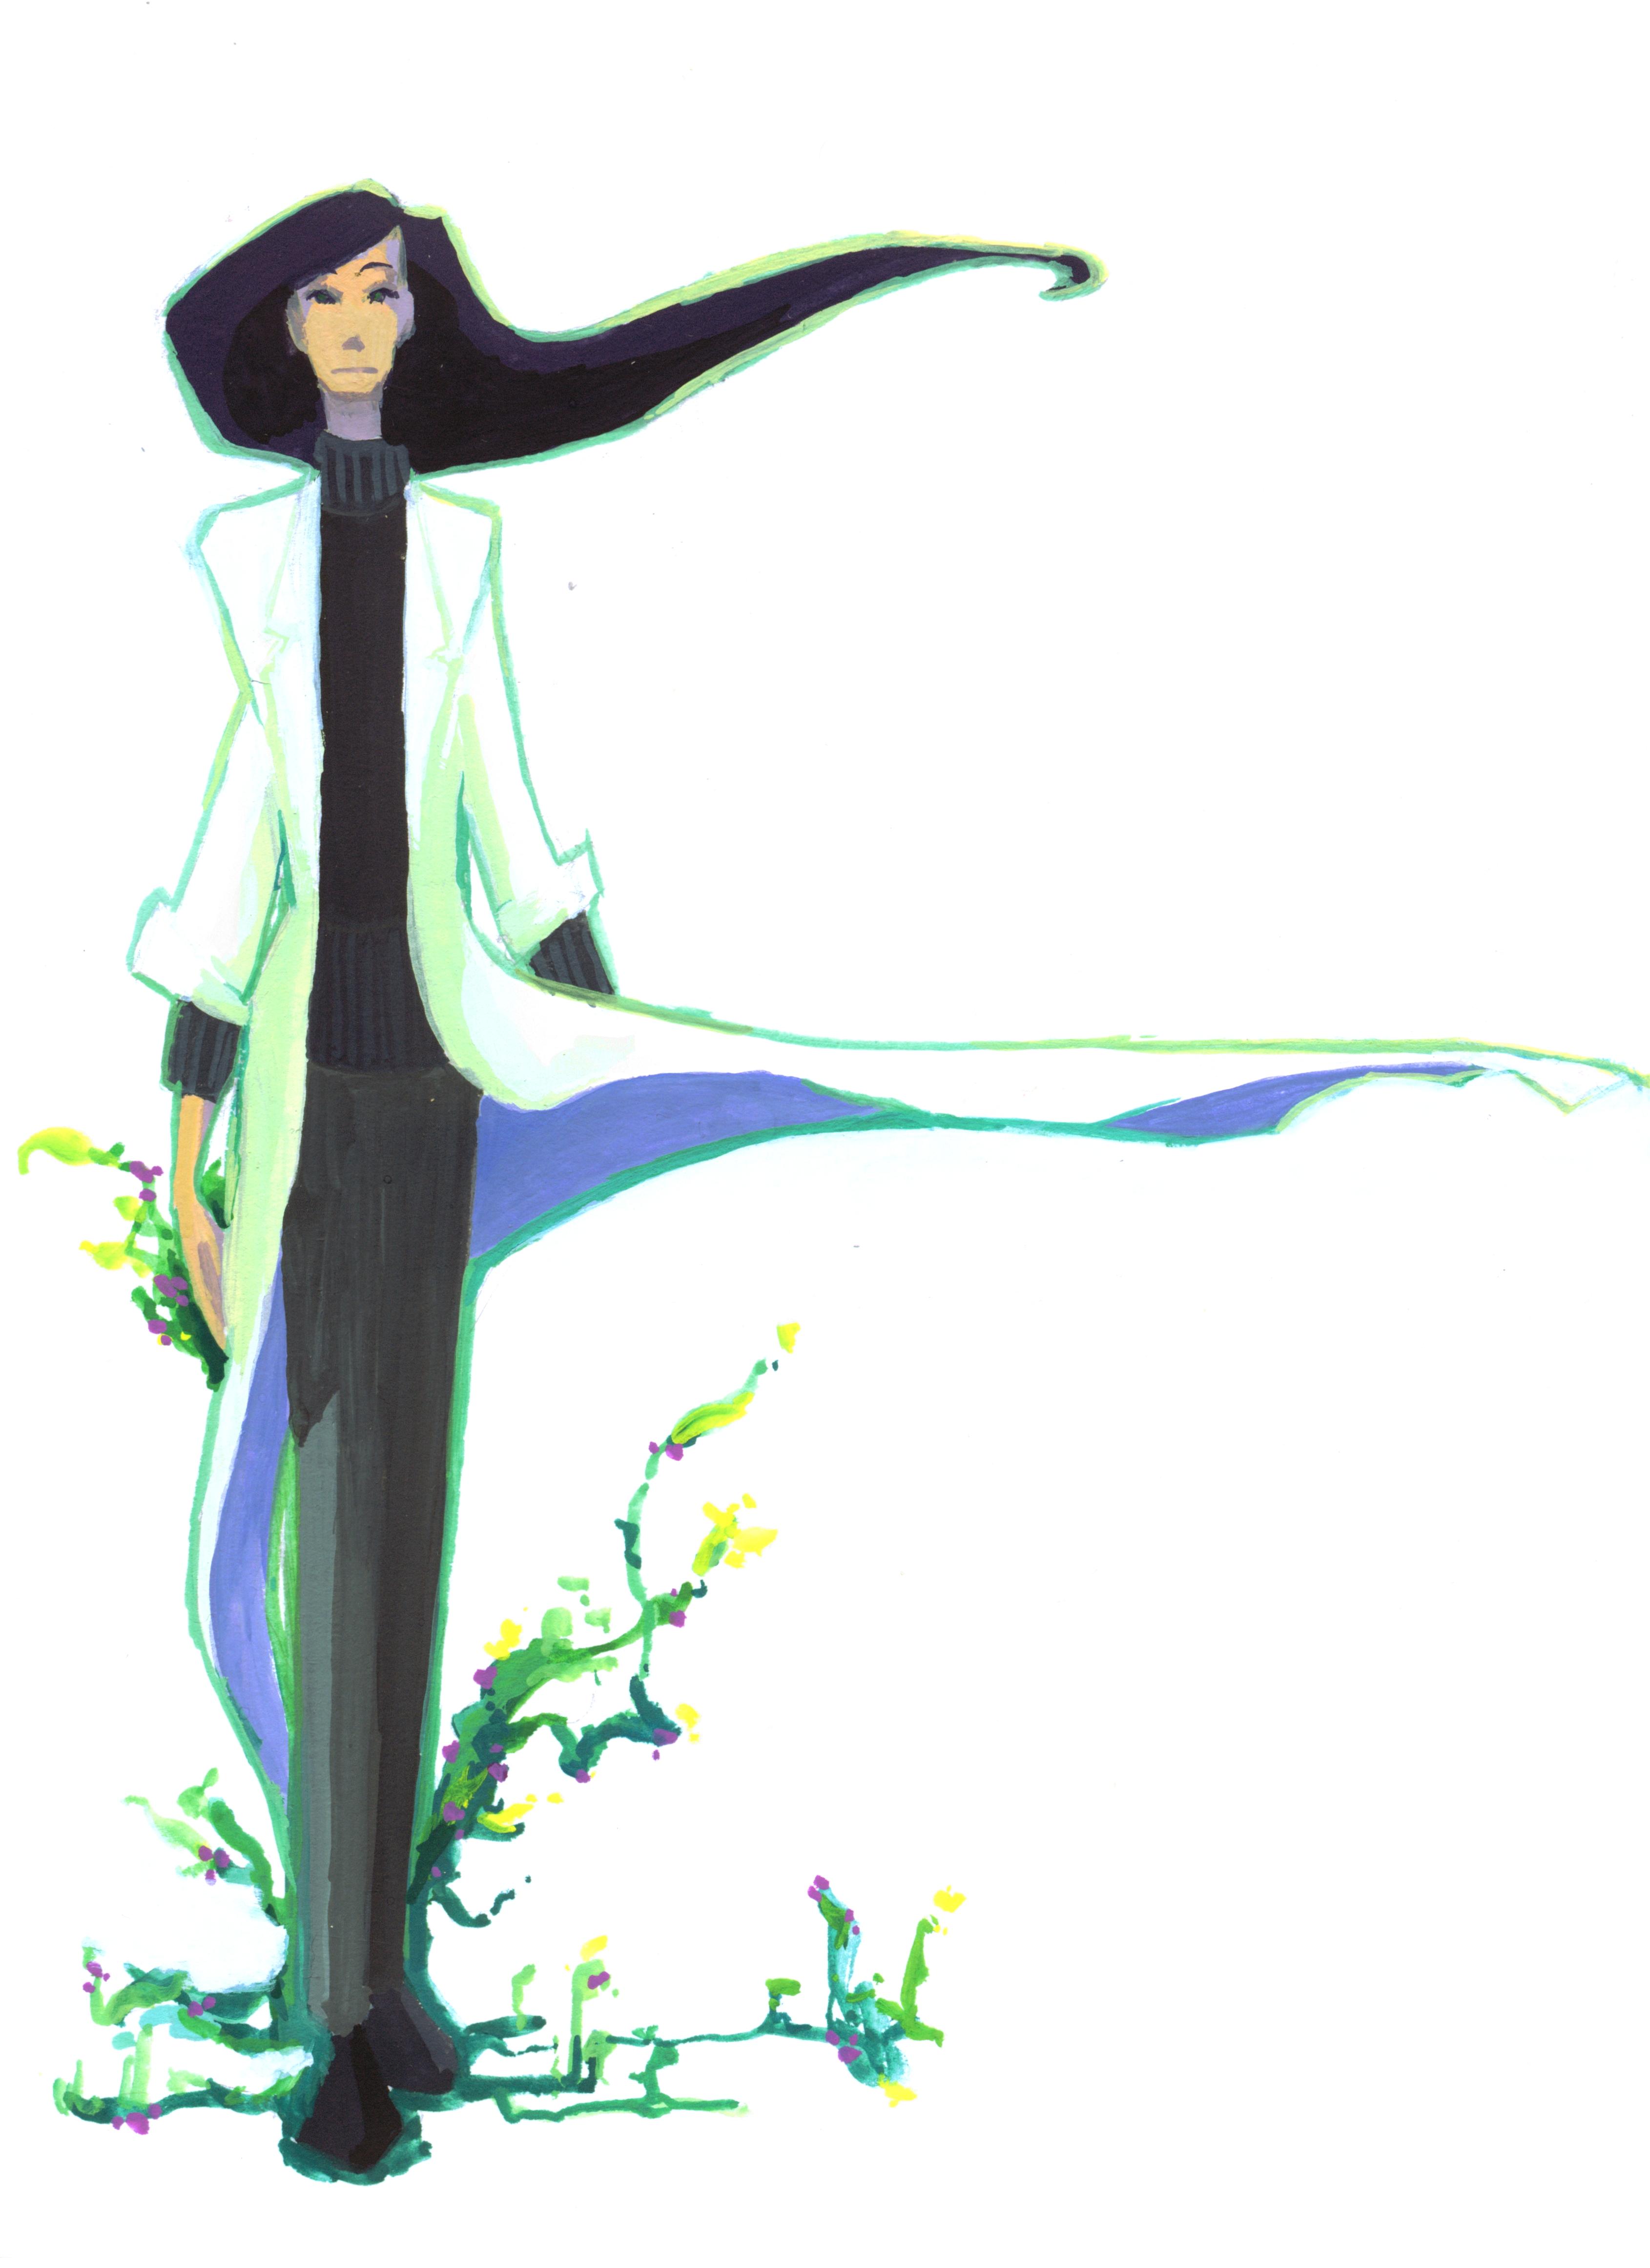 A person stands straight backed, poised. She wears a black sweater,
gray slacks, and a billowing white labcoat, shaded in green. Her hair is dark
and swirls off in the wind. Strange plant life grows at her feet and her right
hand.